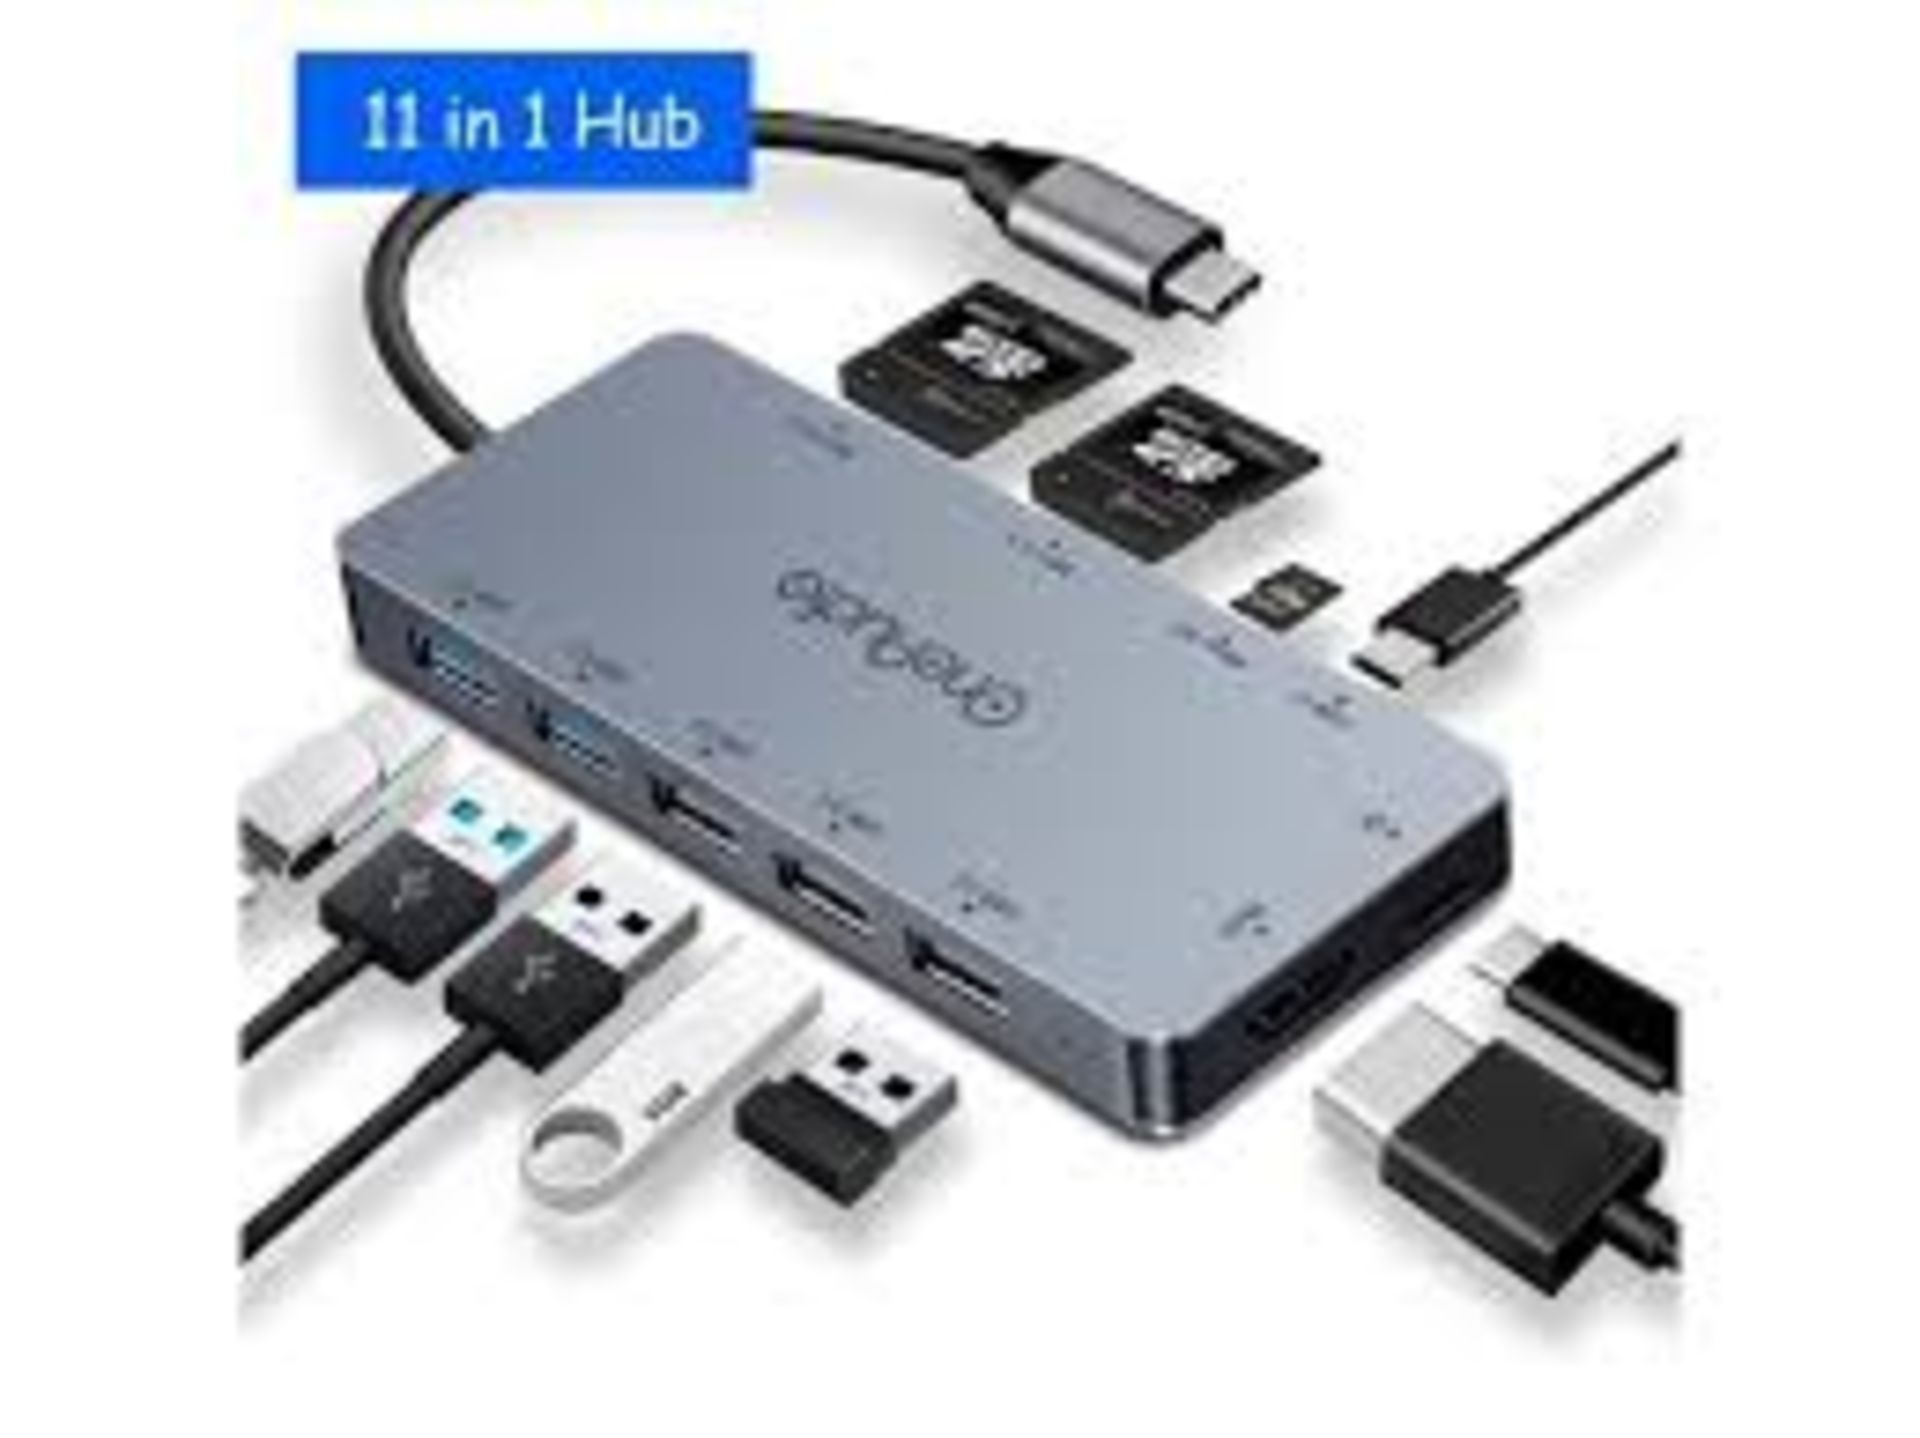 Lot to Contain 4 One Audio 11 in 1 USB Adaptor wit